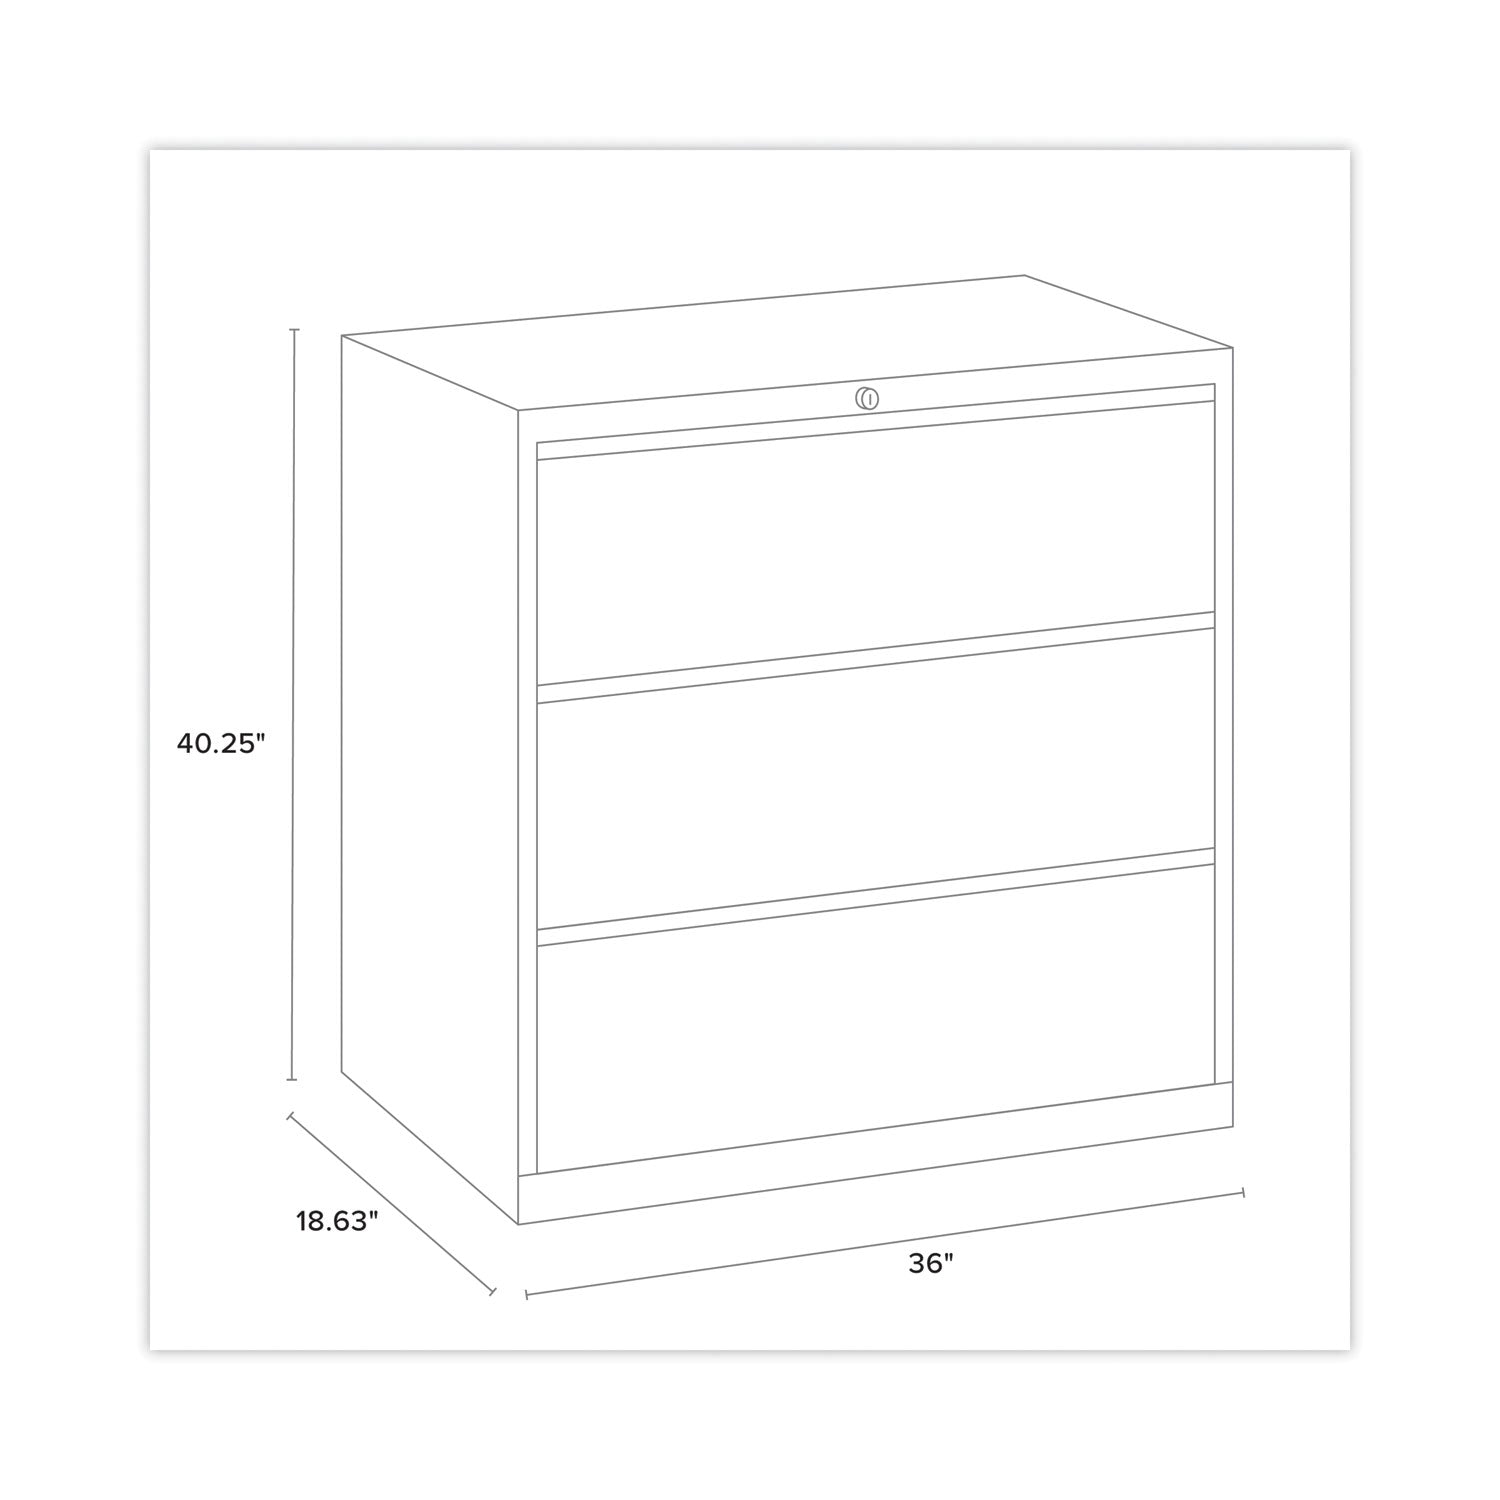 lateral-file-cabinet-3-letter-legal-a4-size-file-drawers-charcoal-36-x-1862-x-4025_hid16066 - 4